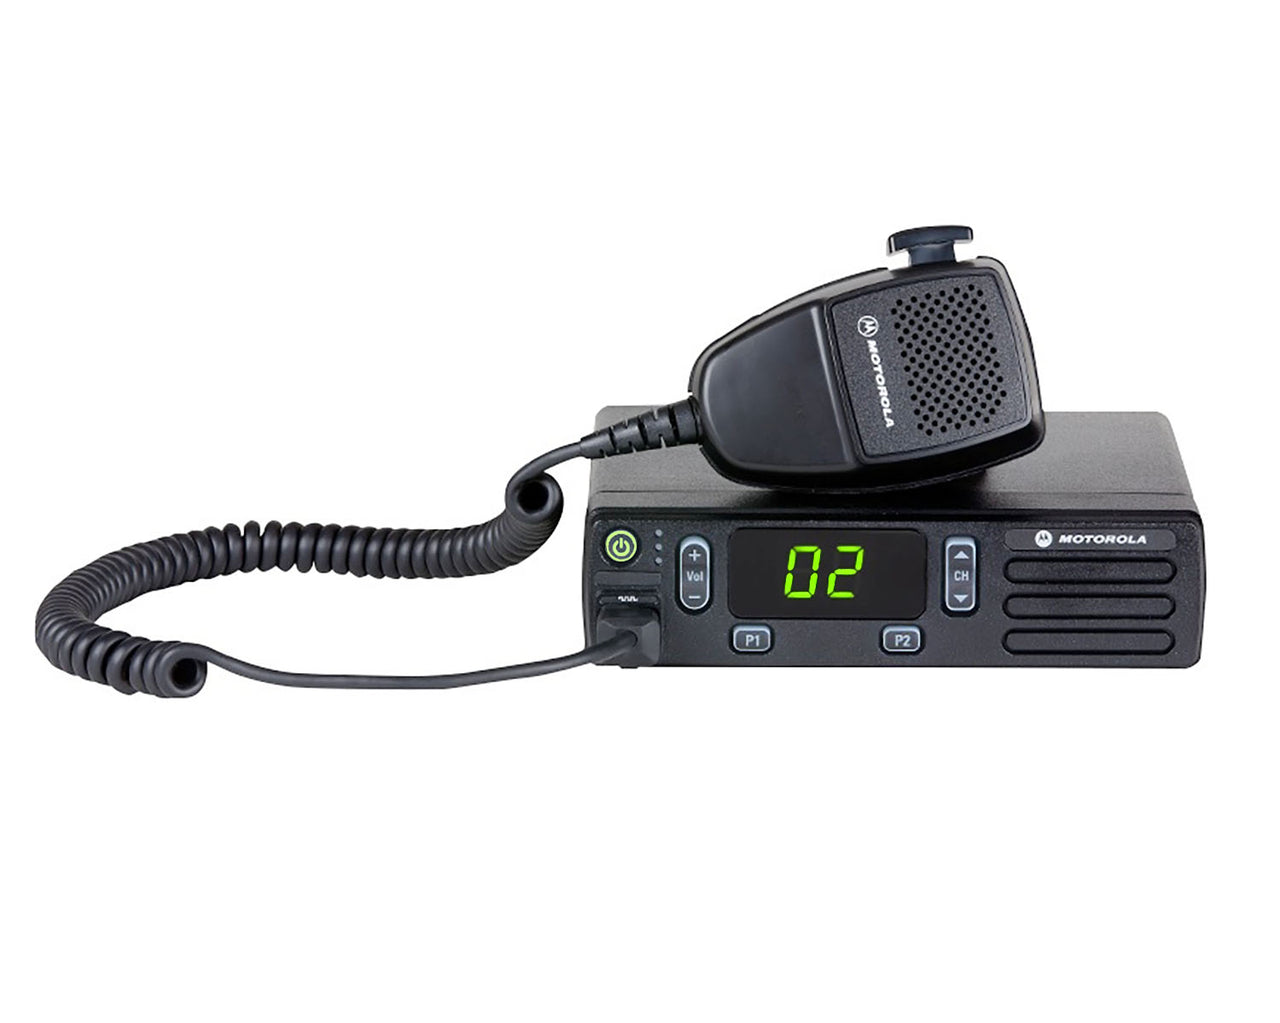 Motorola CM200d, an excellent solution for in-car racing communications